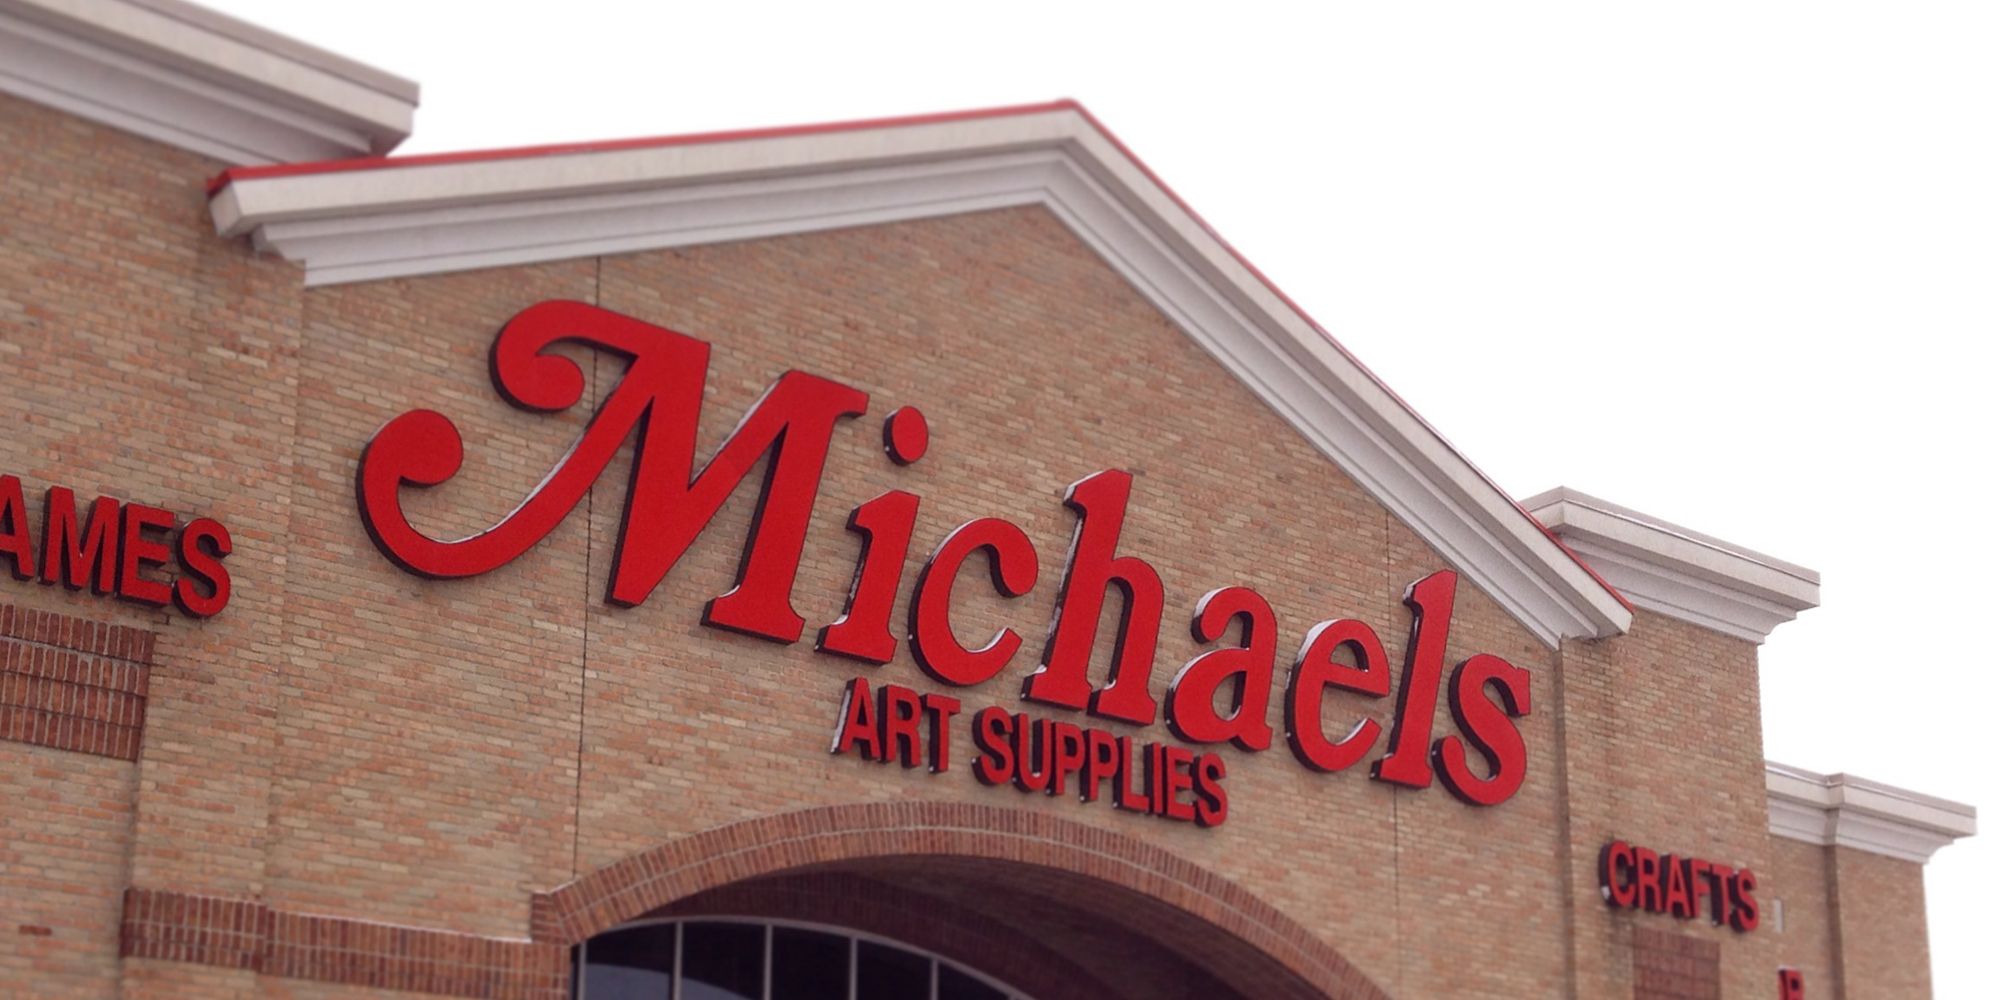 How to Save Money at Michaels - Michaels Coupons